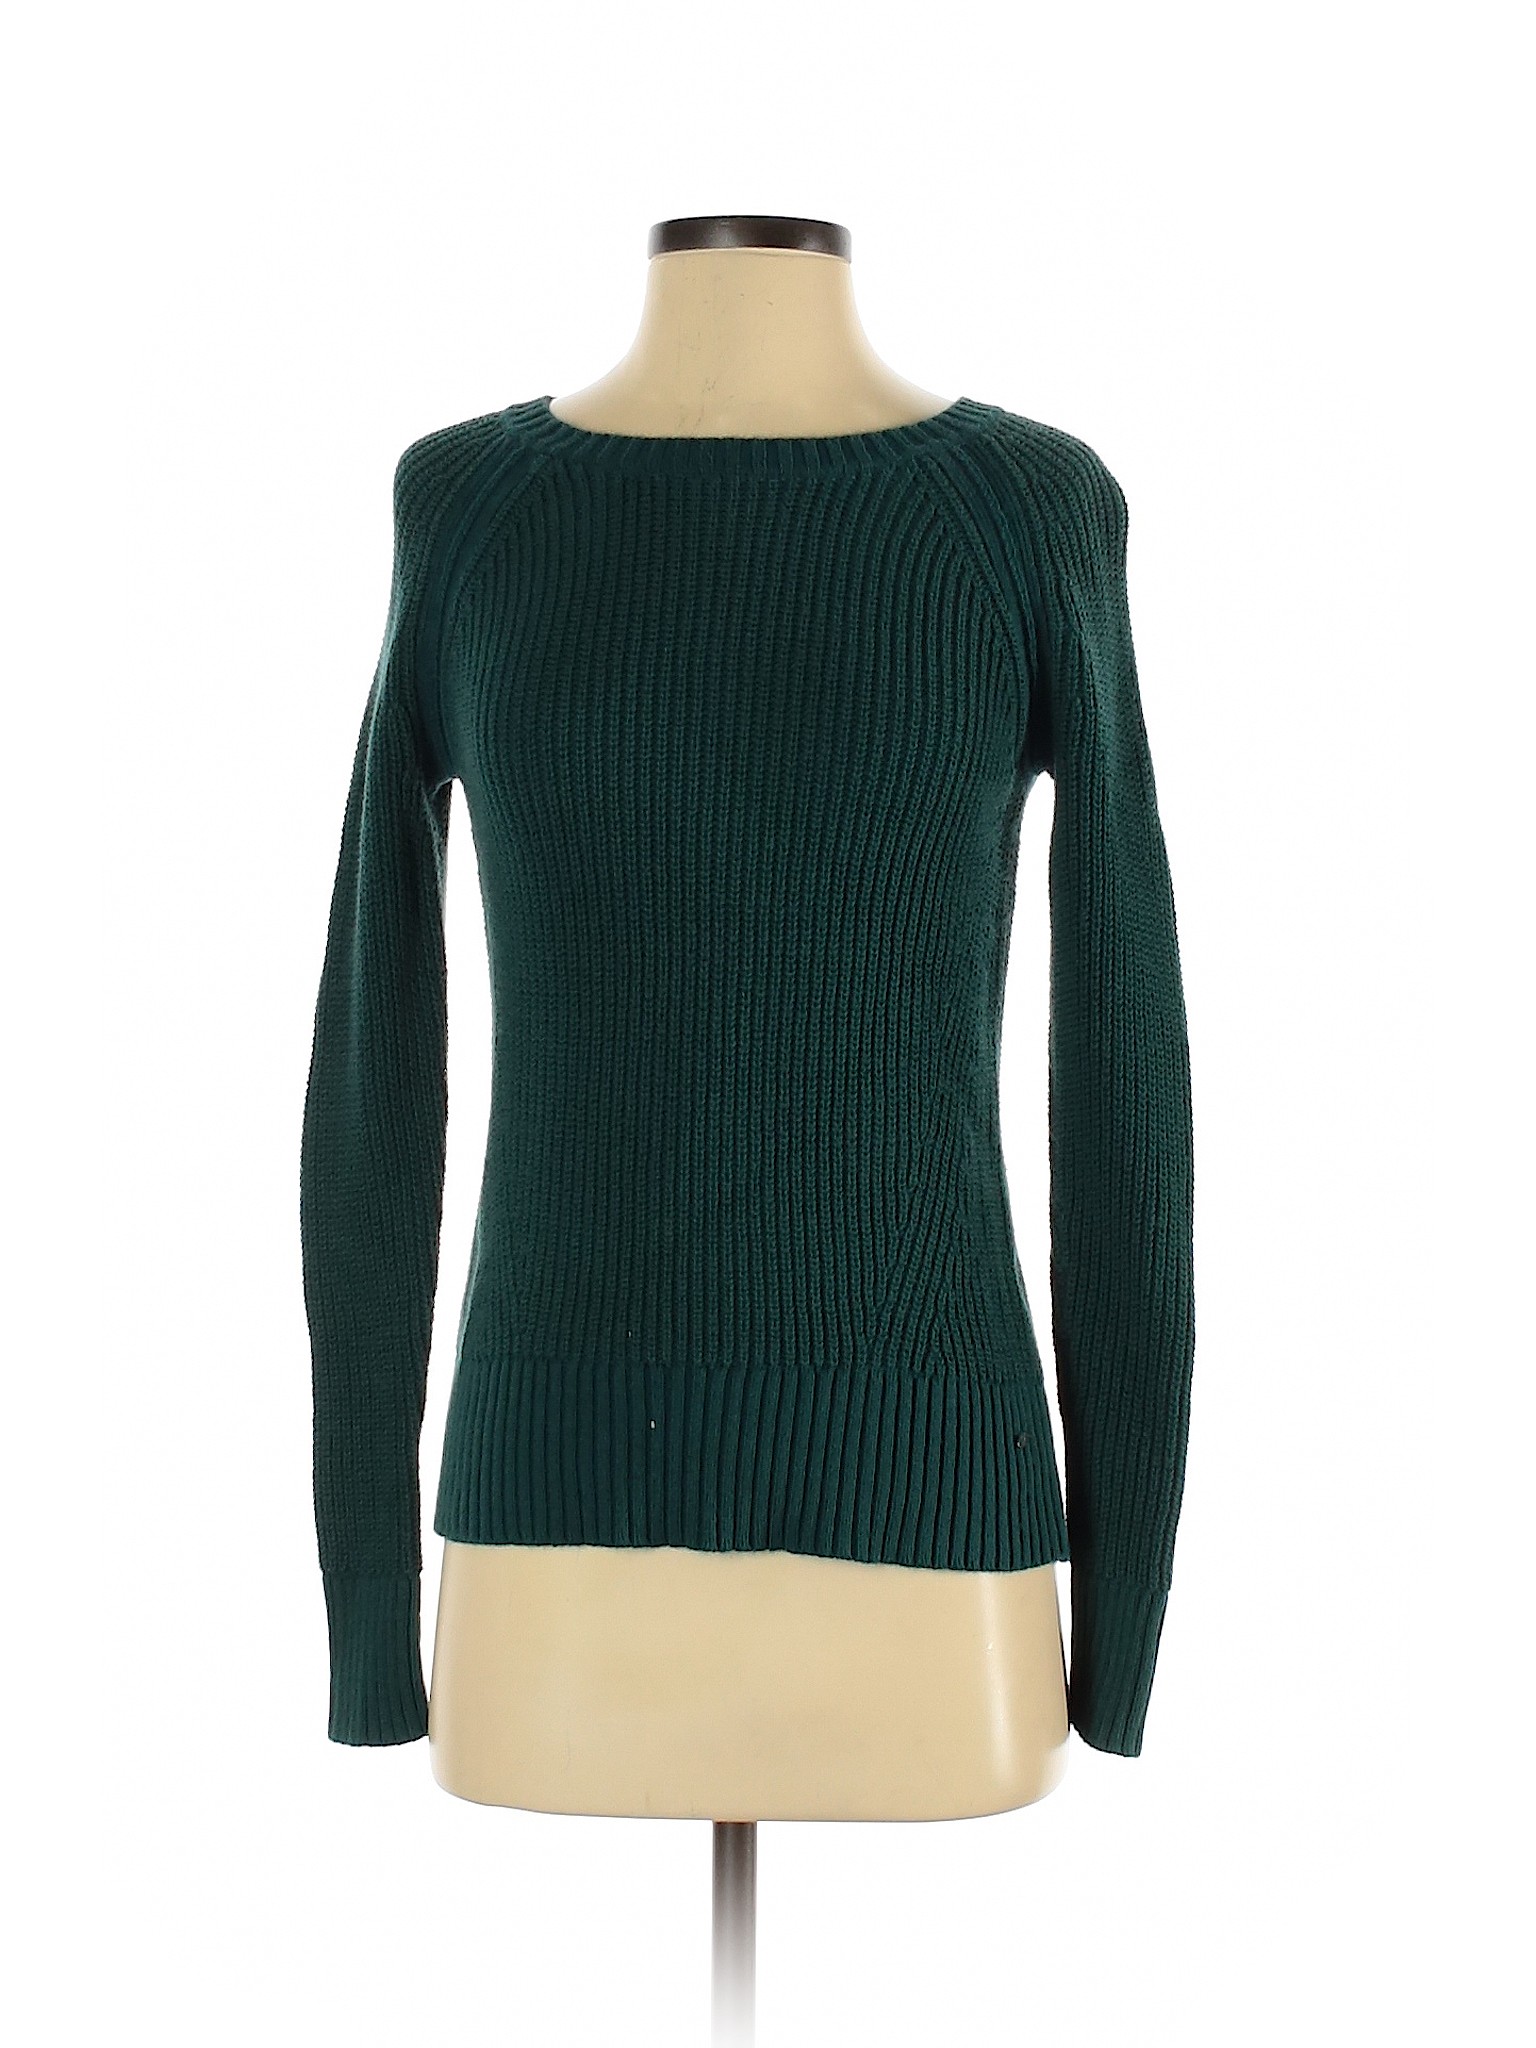 American Eagle Outfitters Women Green Pullover Sweater XS Petites | eBay